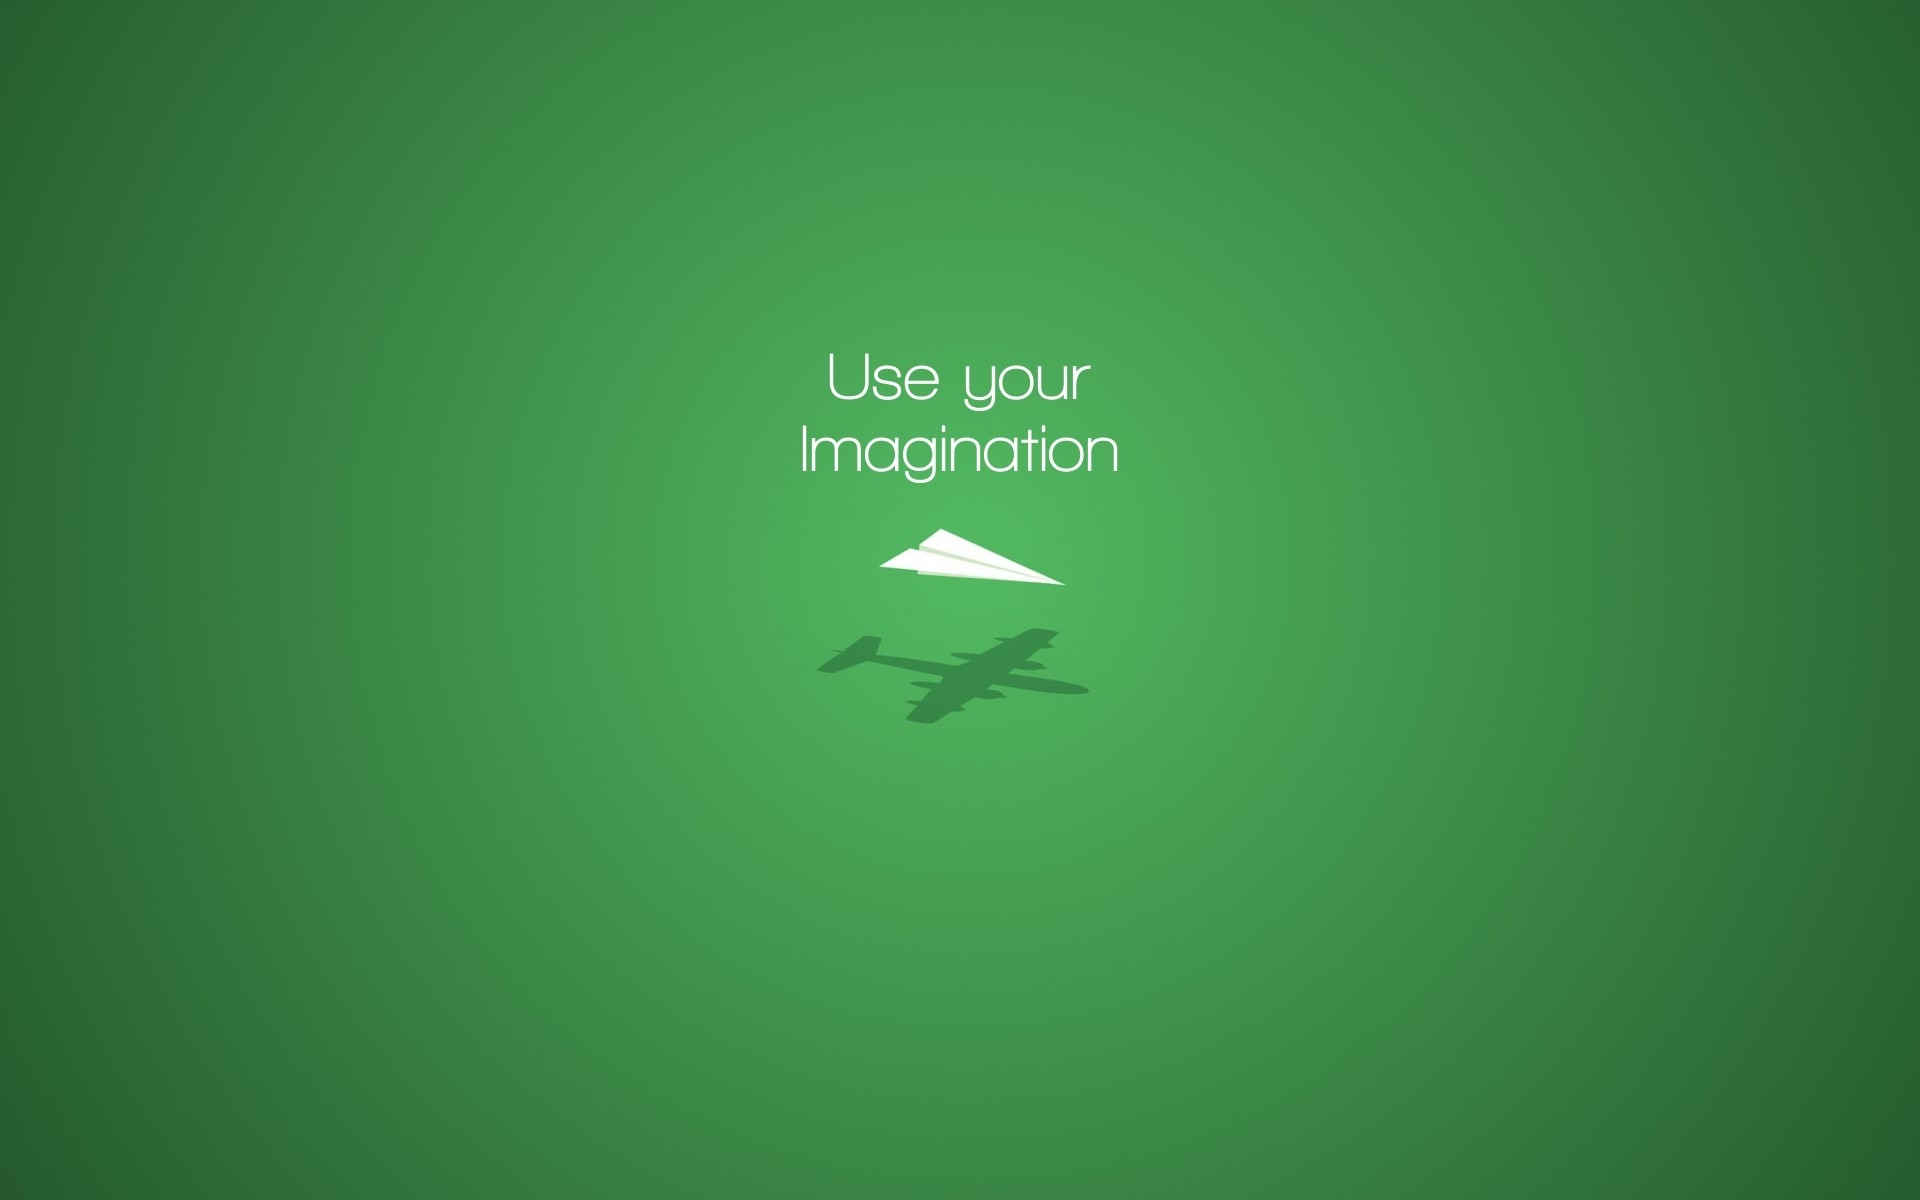 green, motivational, misc, airplane High Definition image